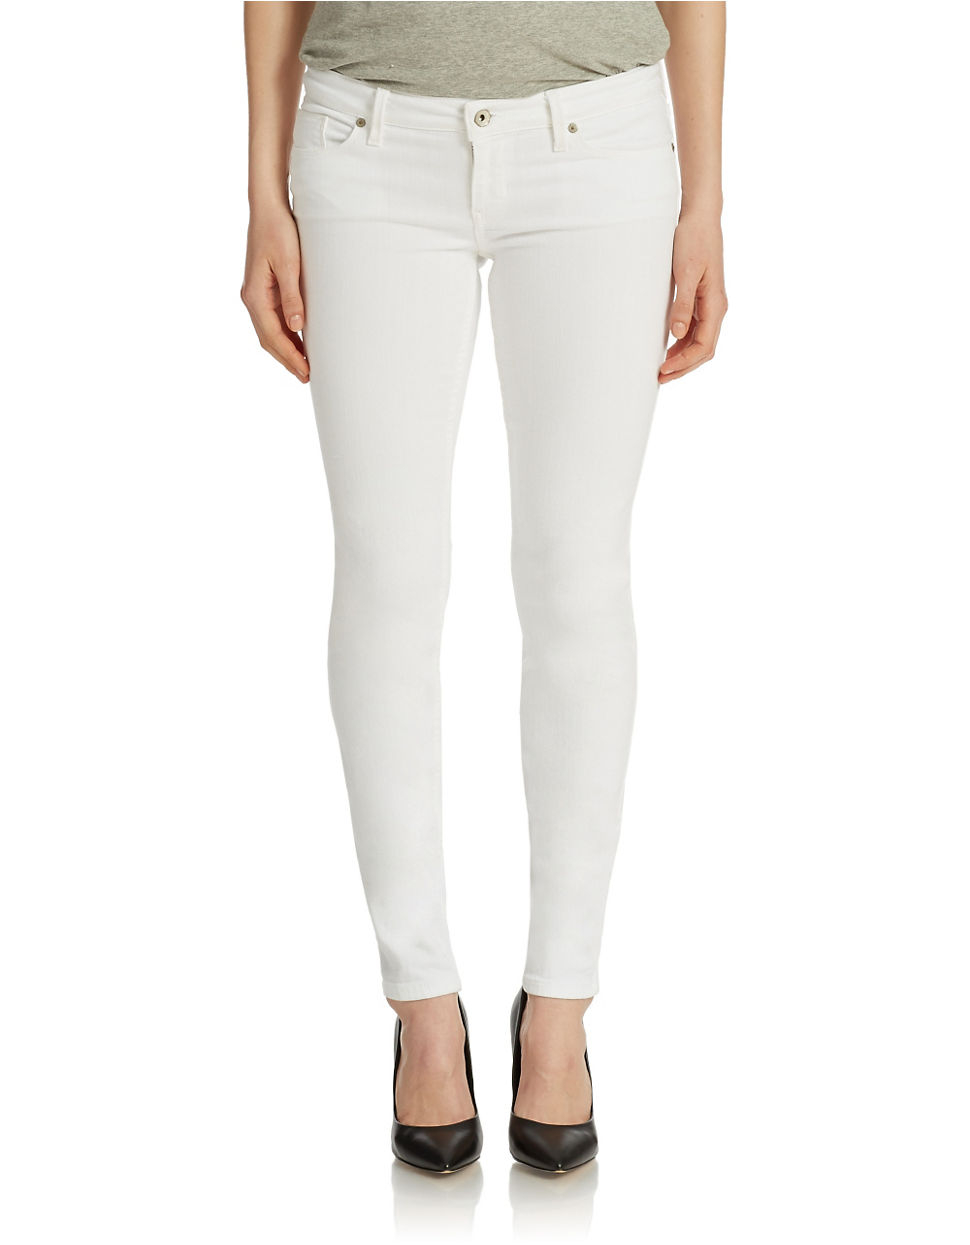 Lyst Guess Low Rise Power Skinny Jeans In White 9166